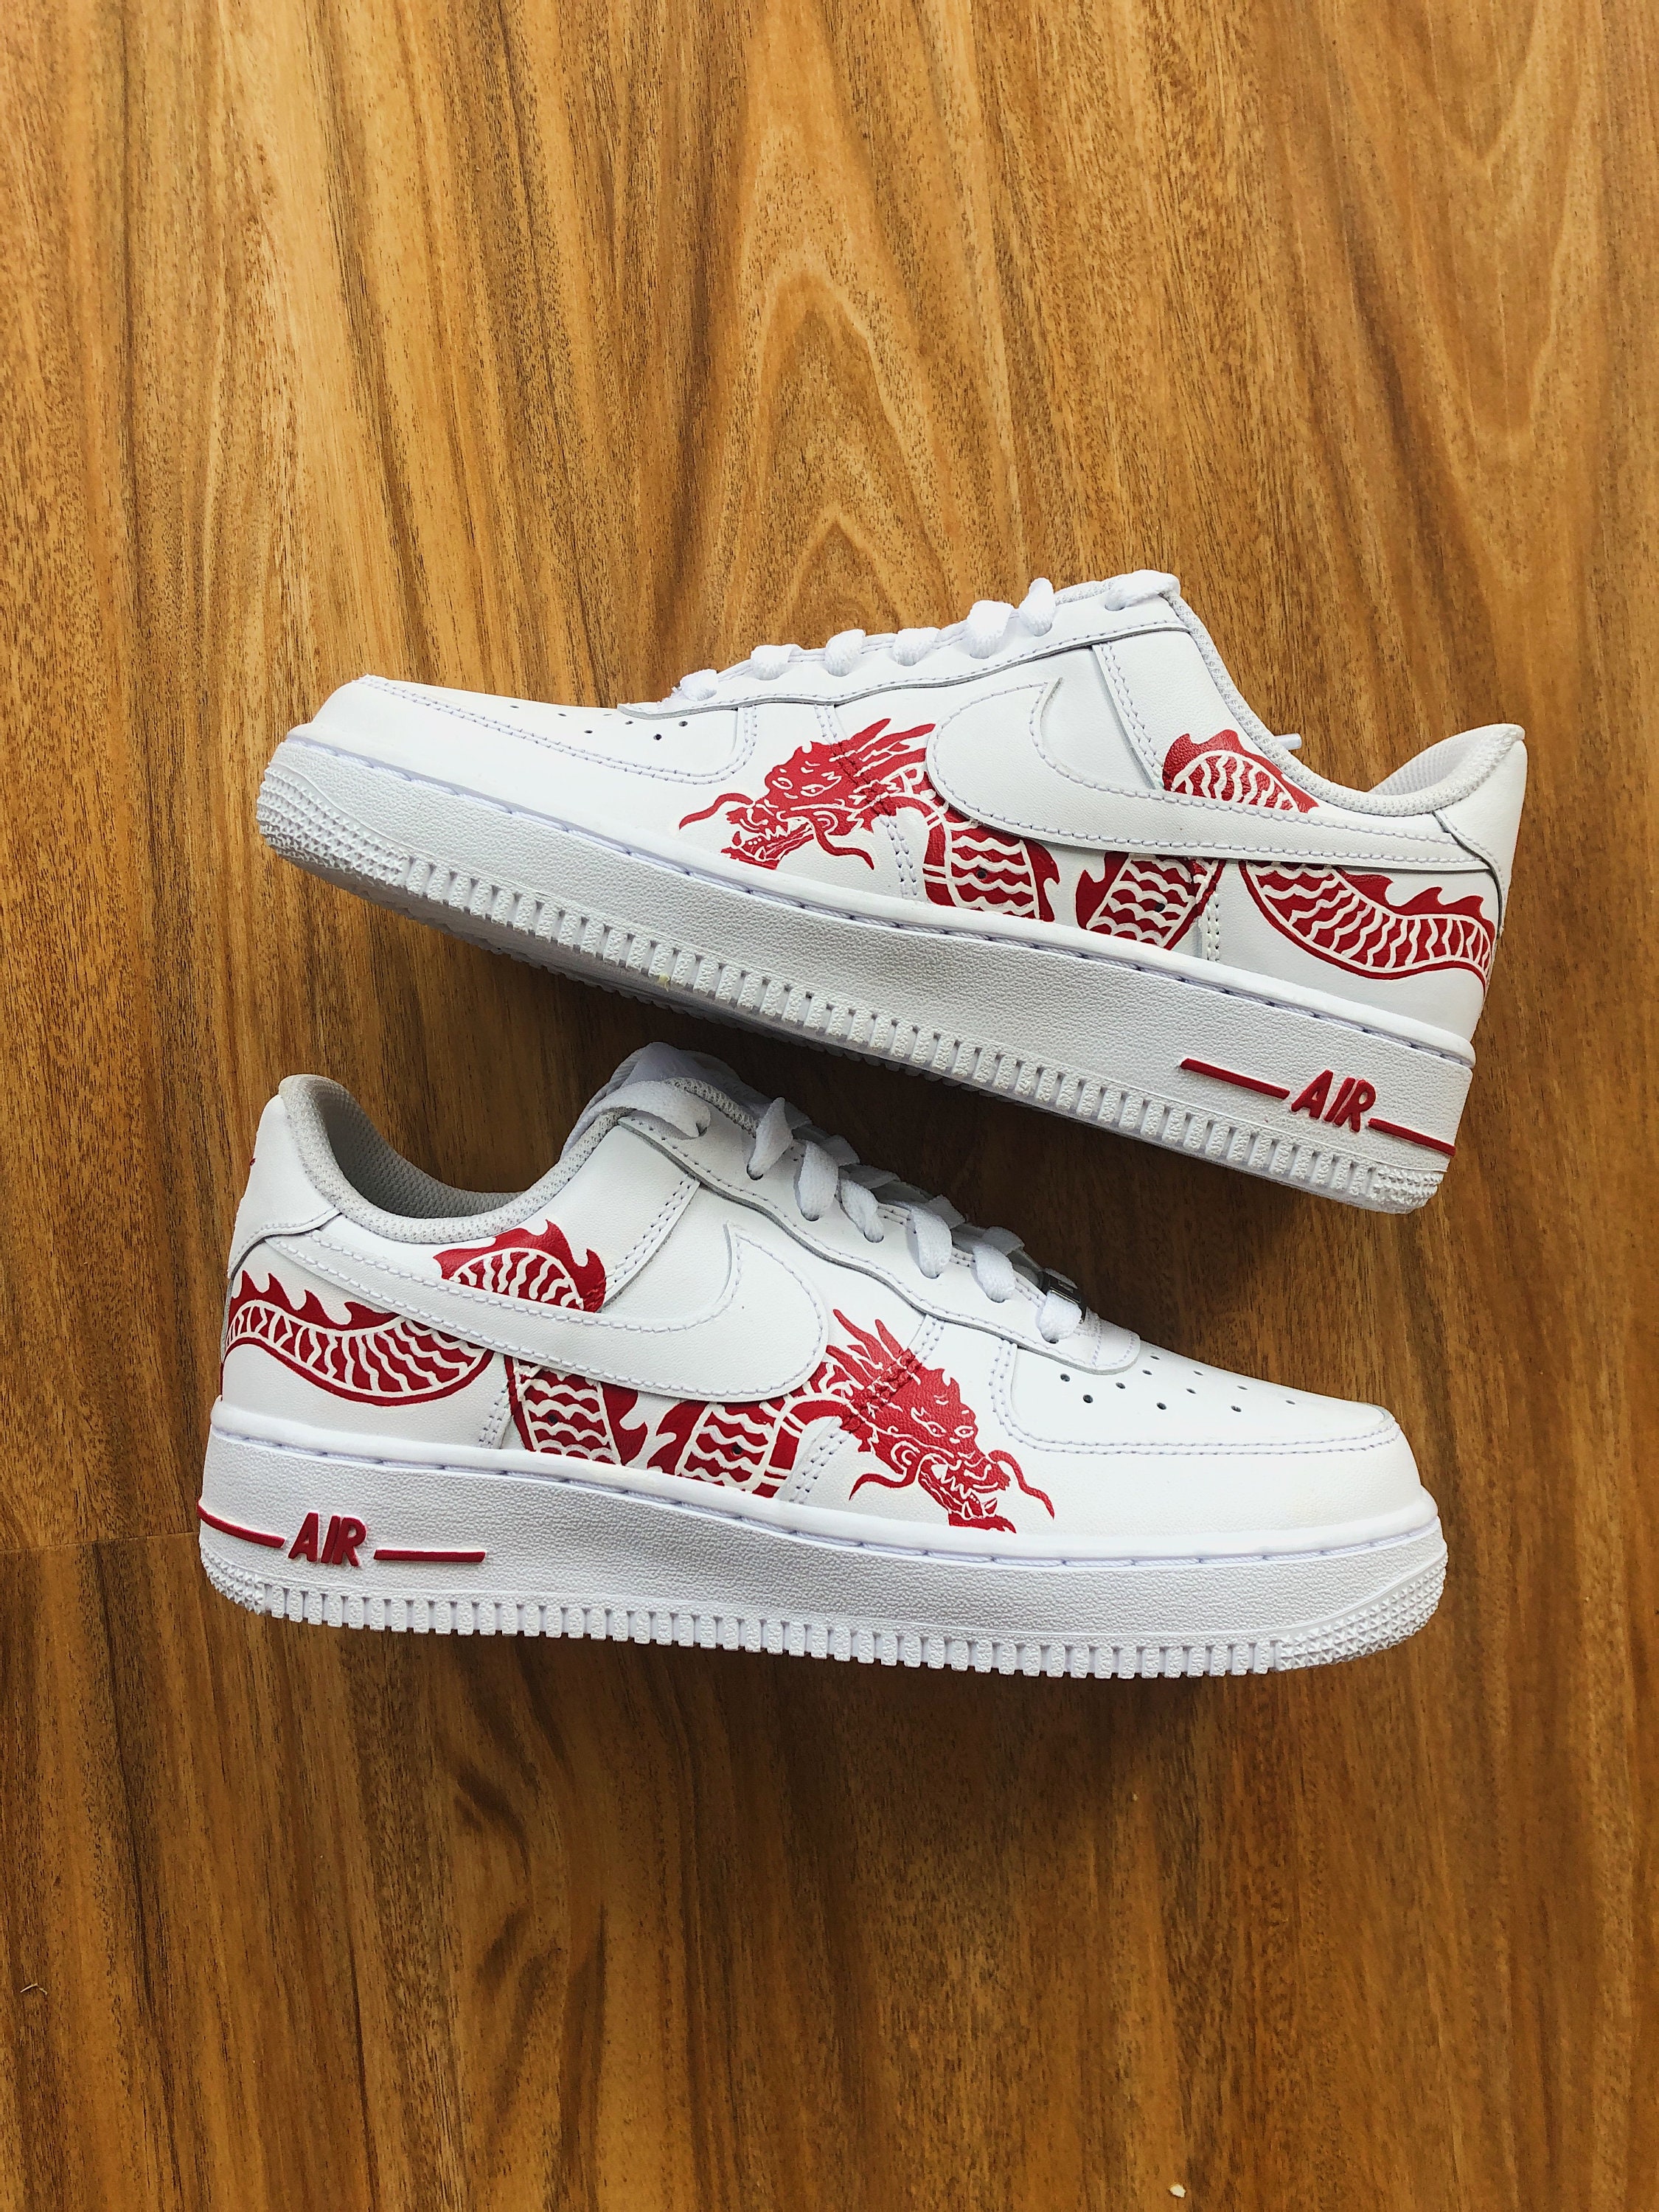 red dragon air forces